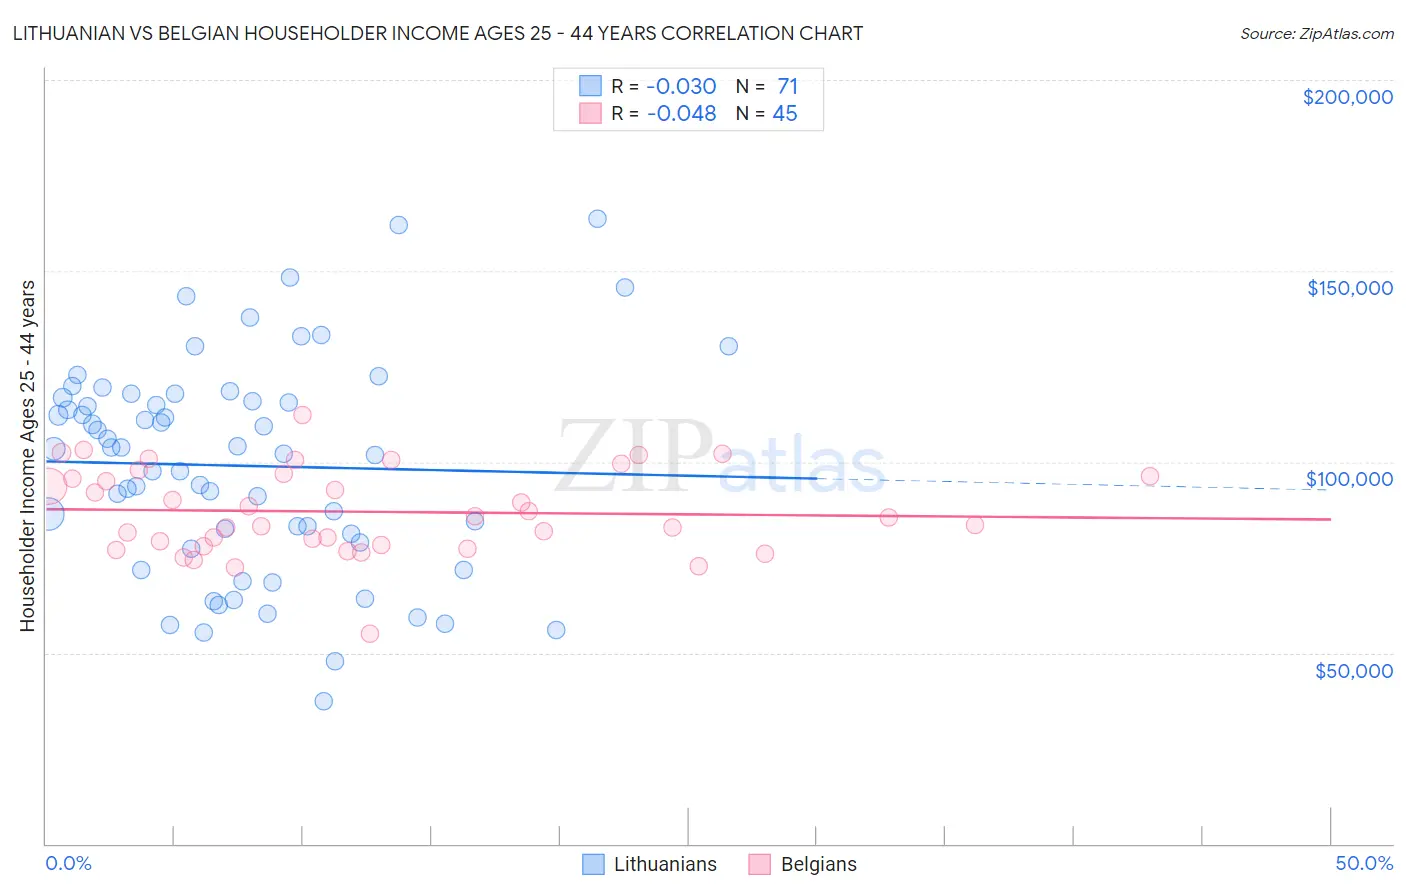 Lithuanian vs Belgian Householder Income Ages 25 - 44 years